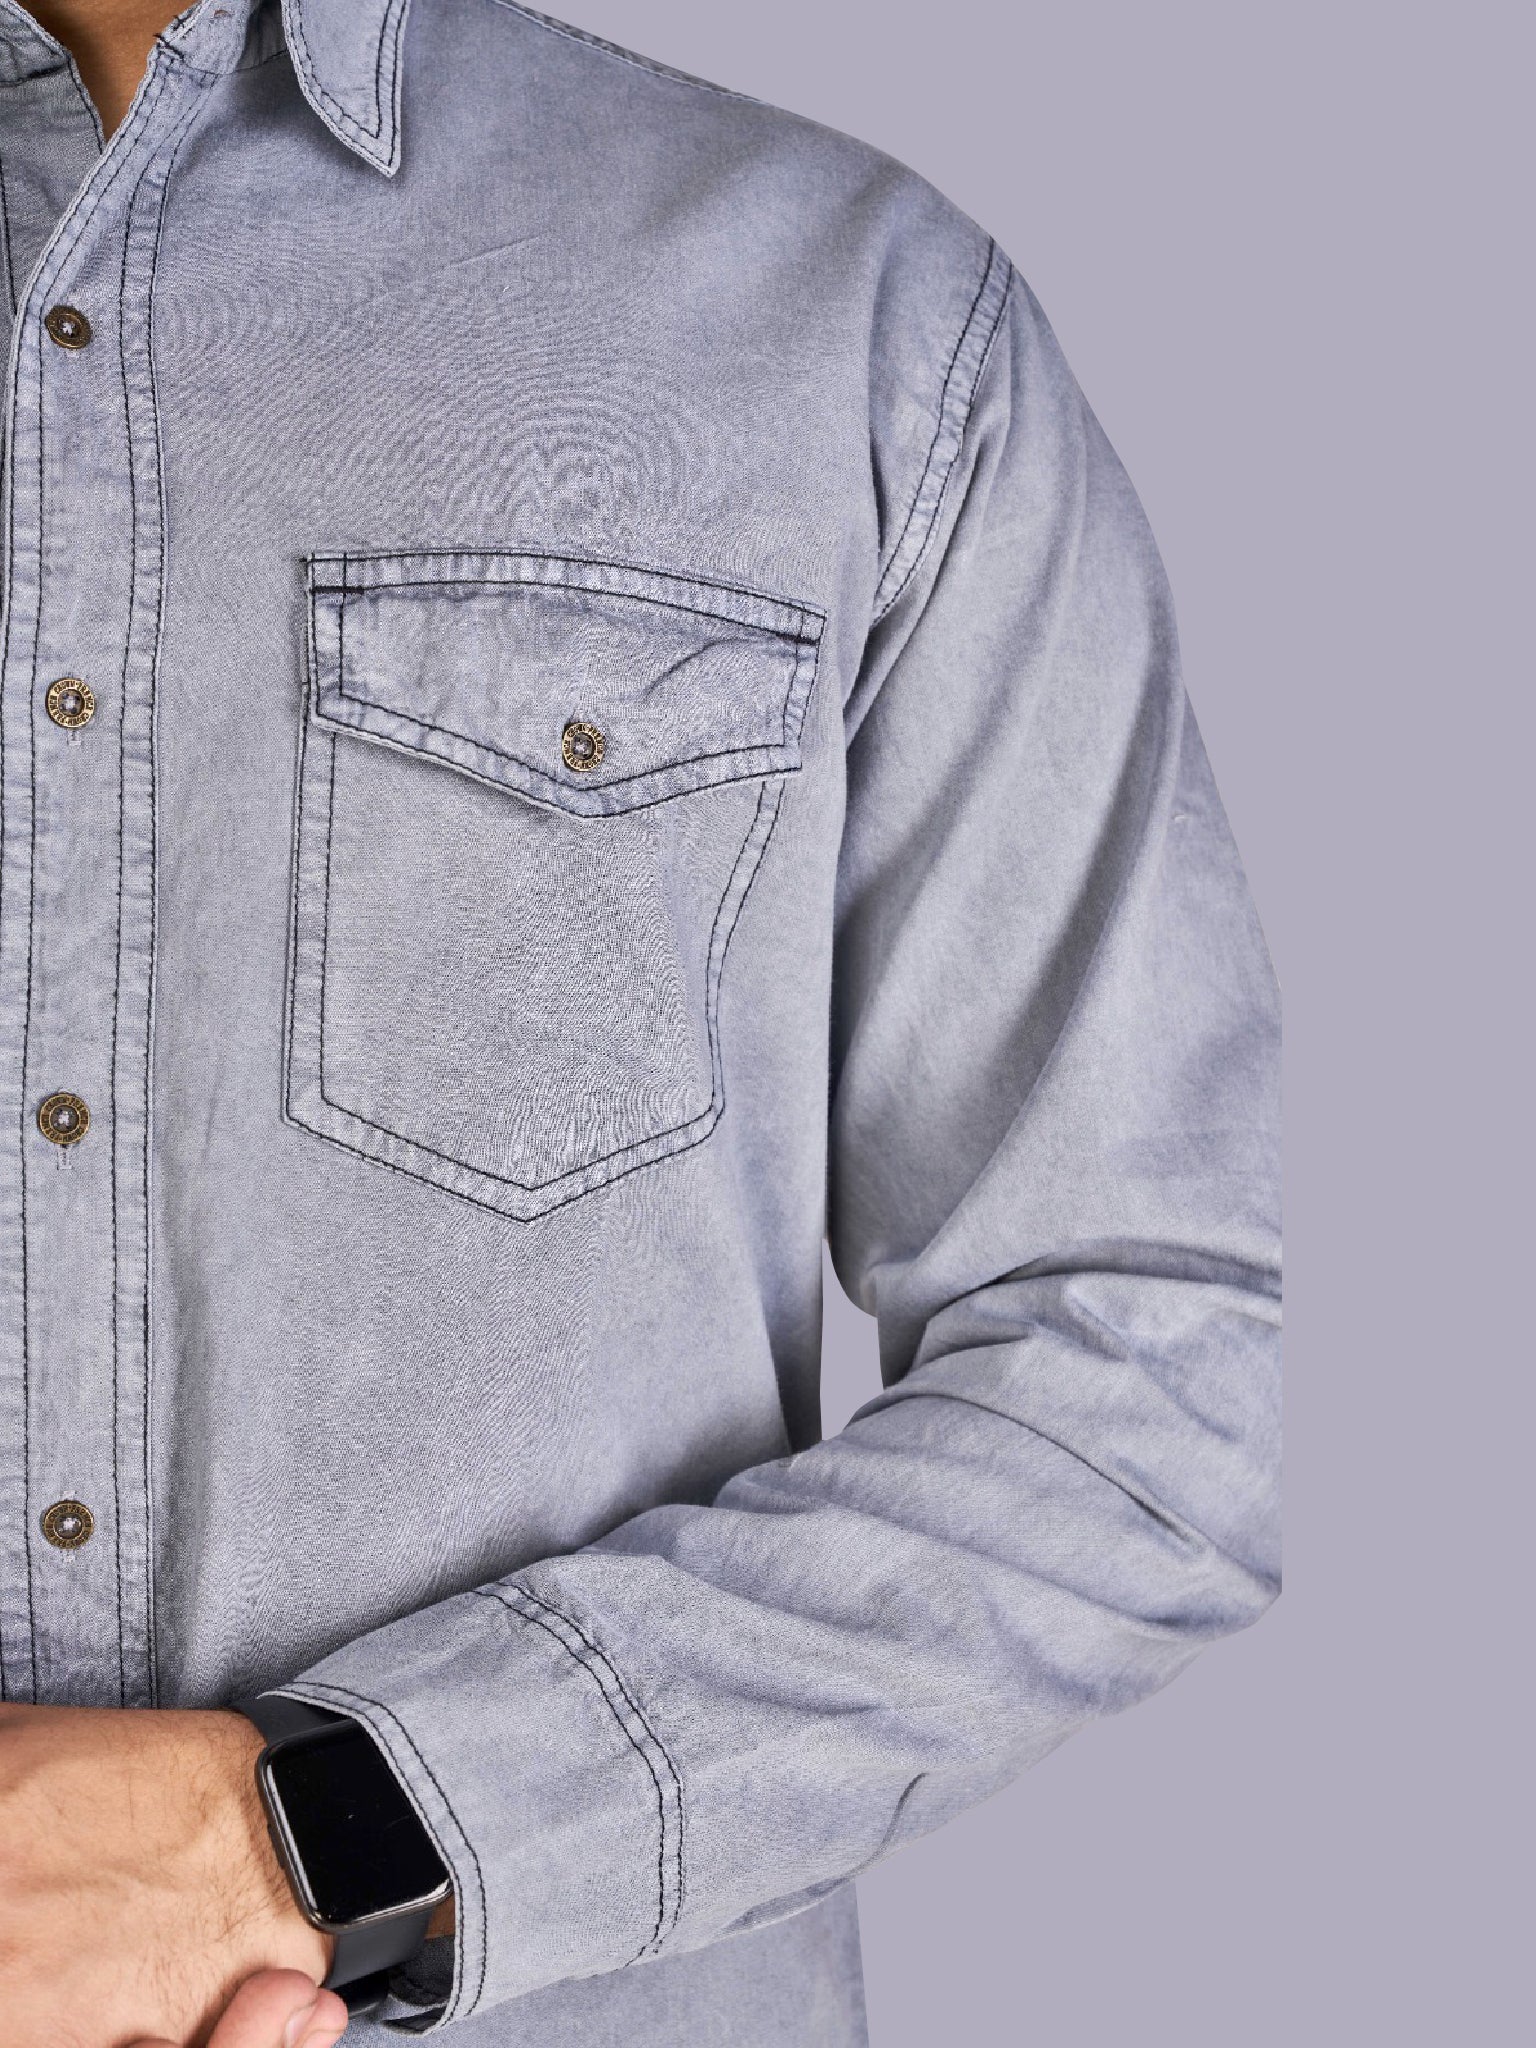 Steel Gray Denim Shirts To Unveiling Refined Style-3